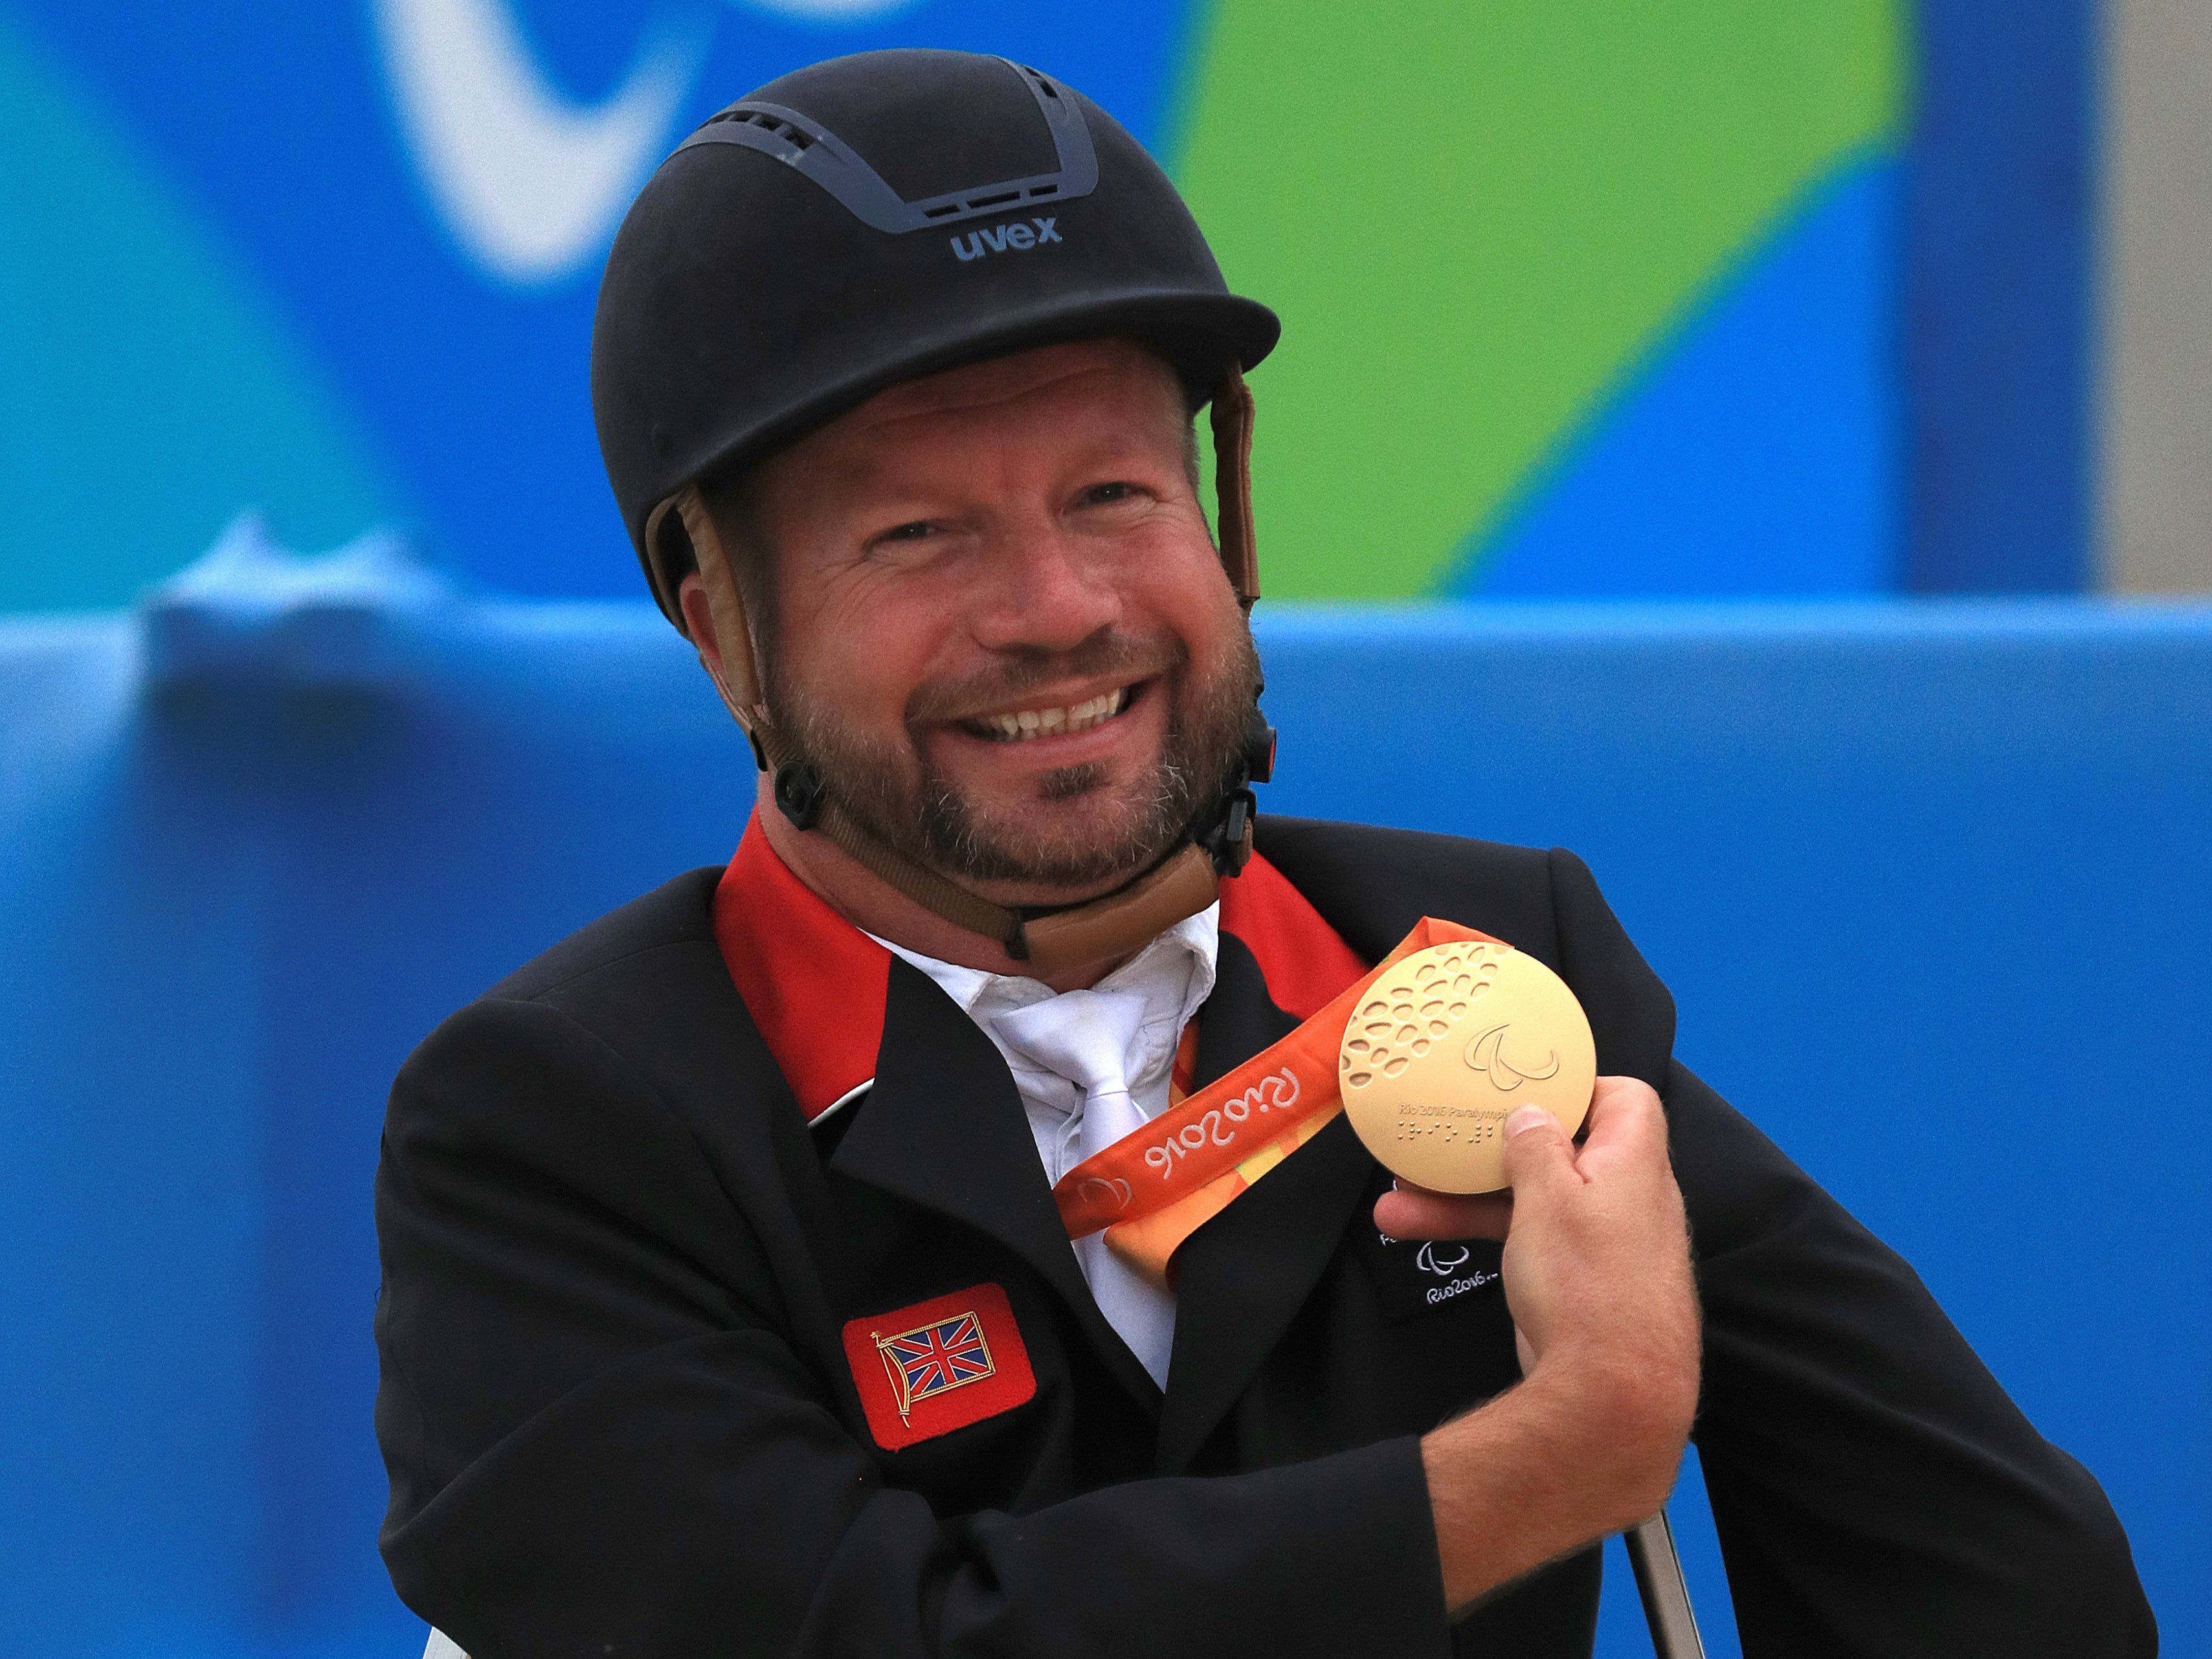 Lee Pearson celebrates with a medal